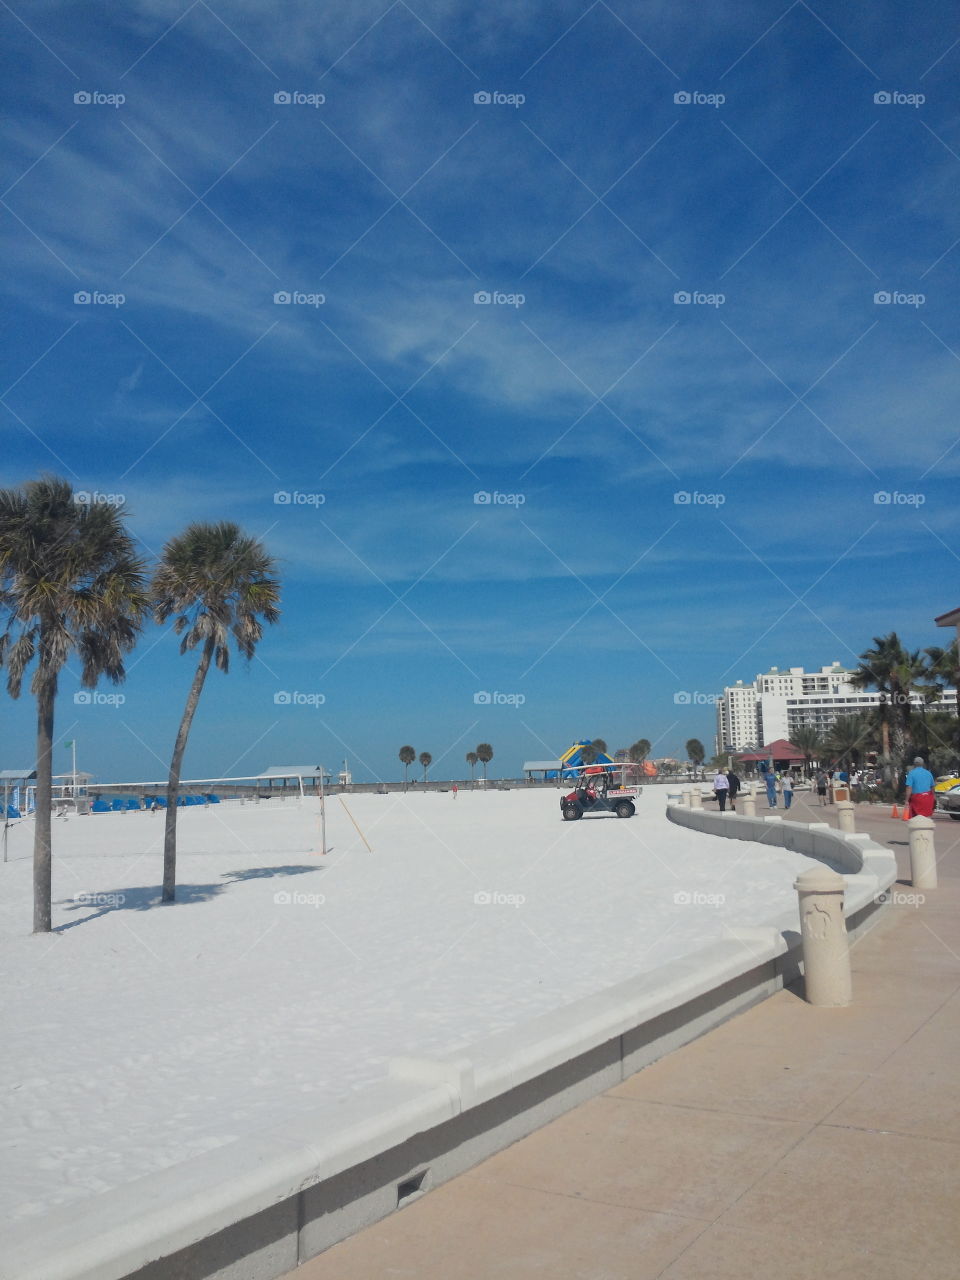 Clearwater's beach